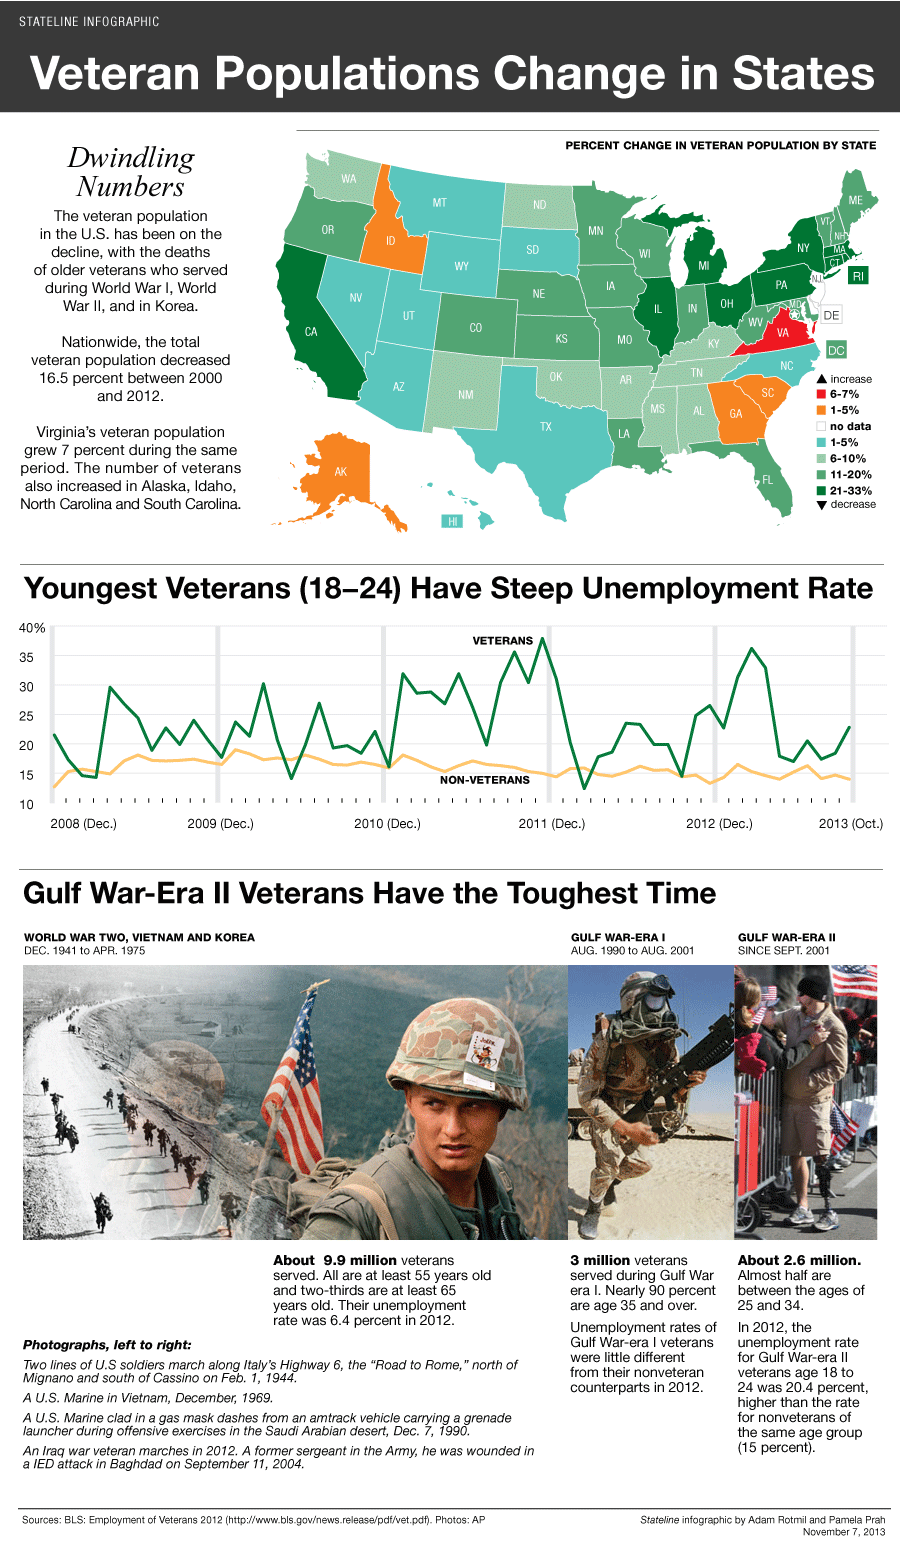 Young Veterans Have the Hardest Time Finding Work